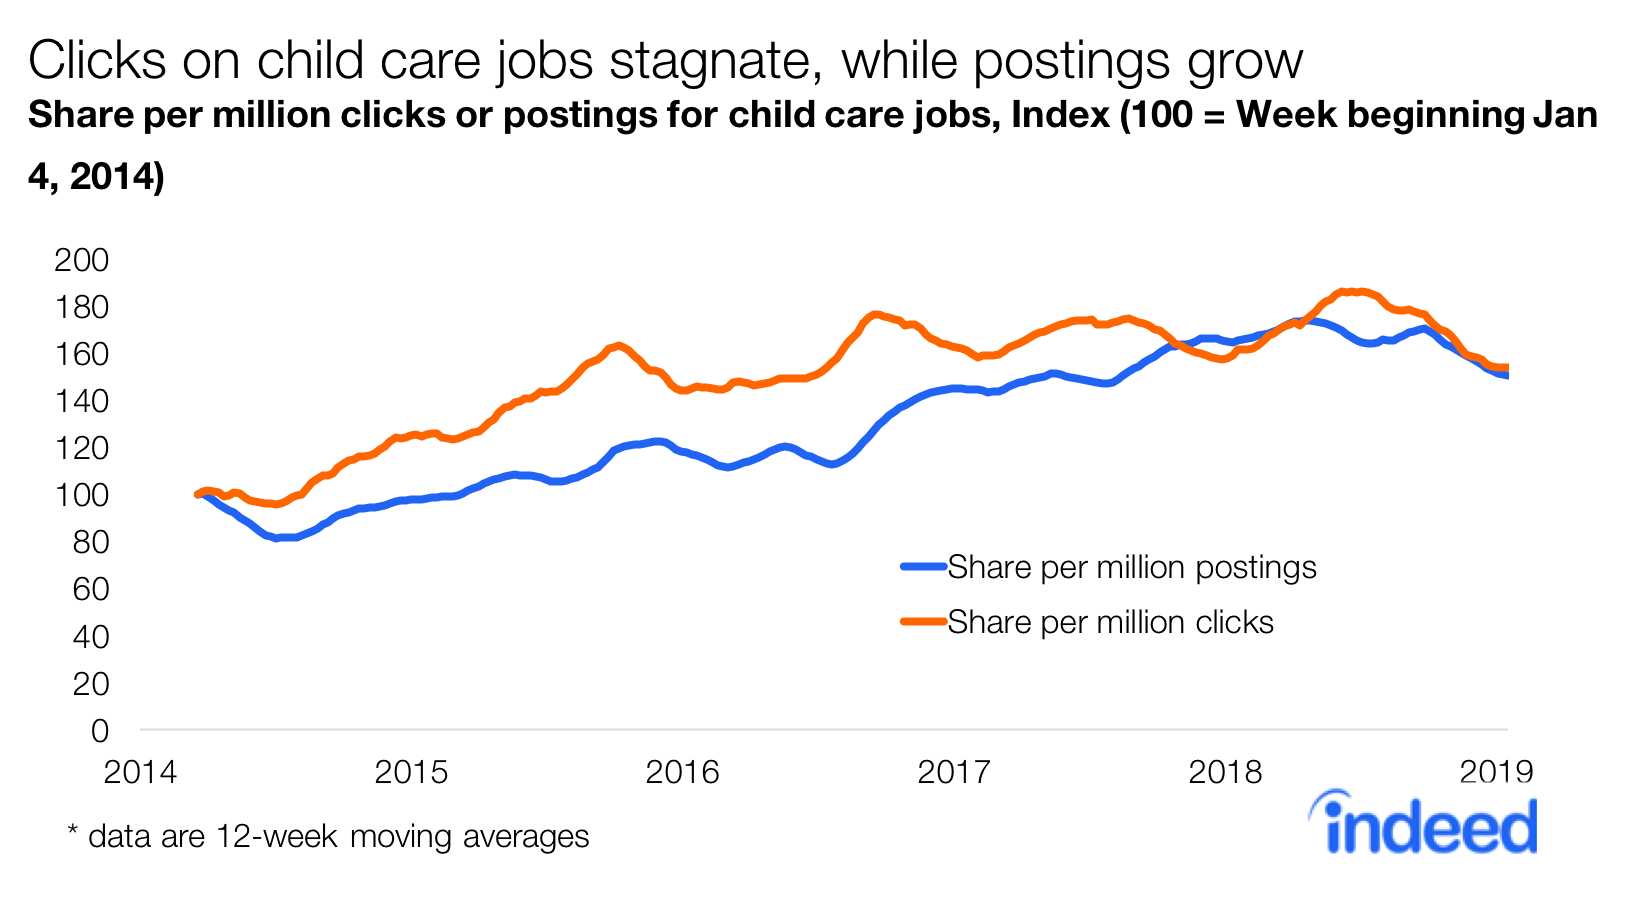 Clicks on child care jobs stagnate, while postings grow